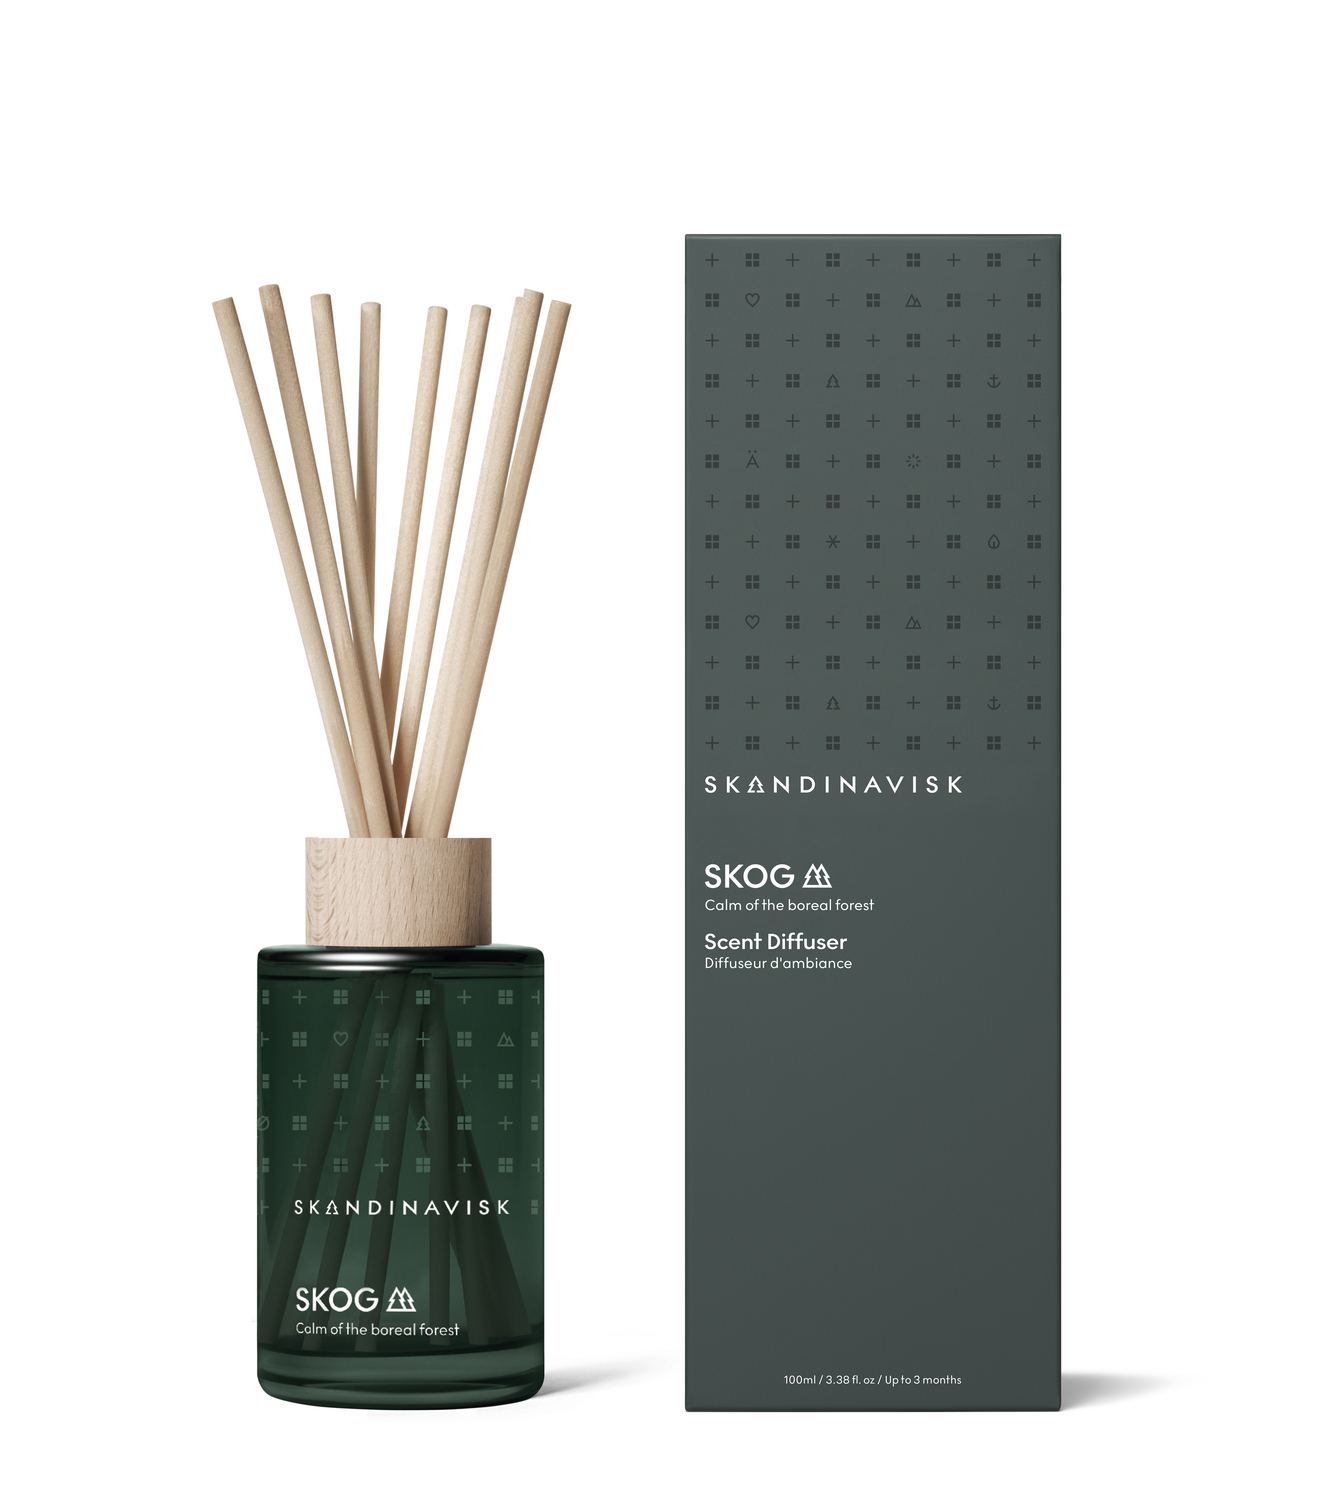 Smaller sized room diffuser from Skandinavisk with the scent of the Nordic forests, in luxury dark green glass, 8 reeds and all natural and vegan scent.